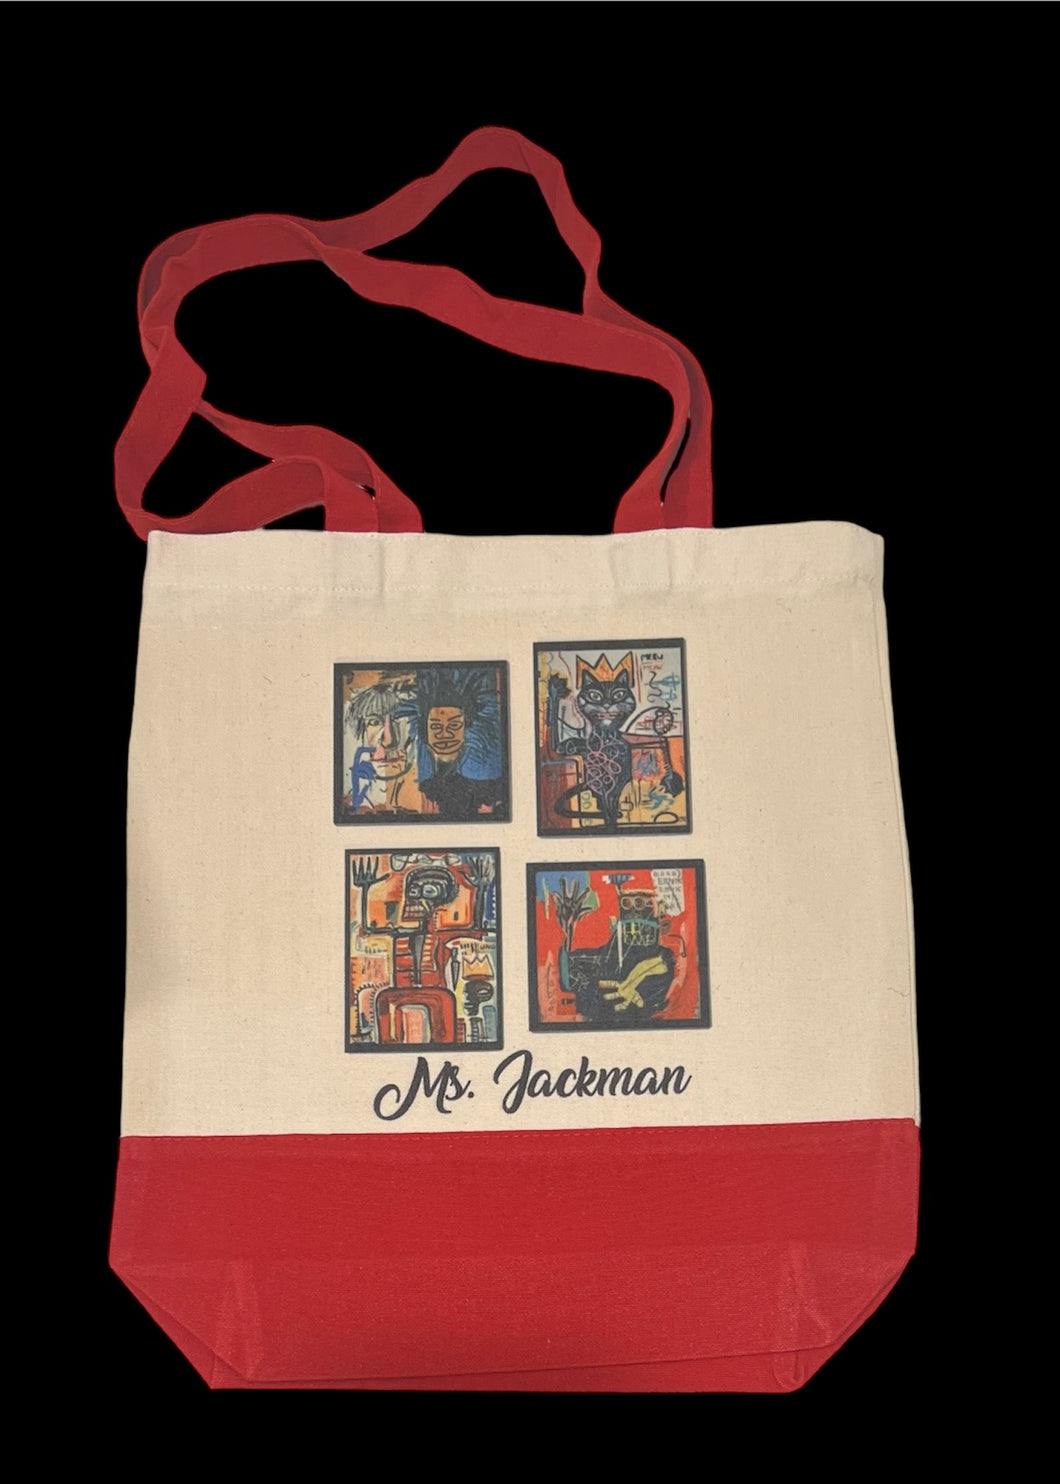 Basquiat personalized tote bag